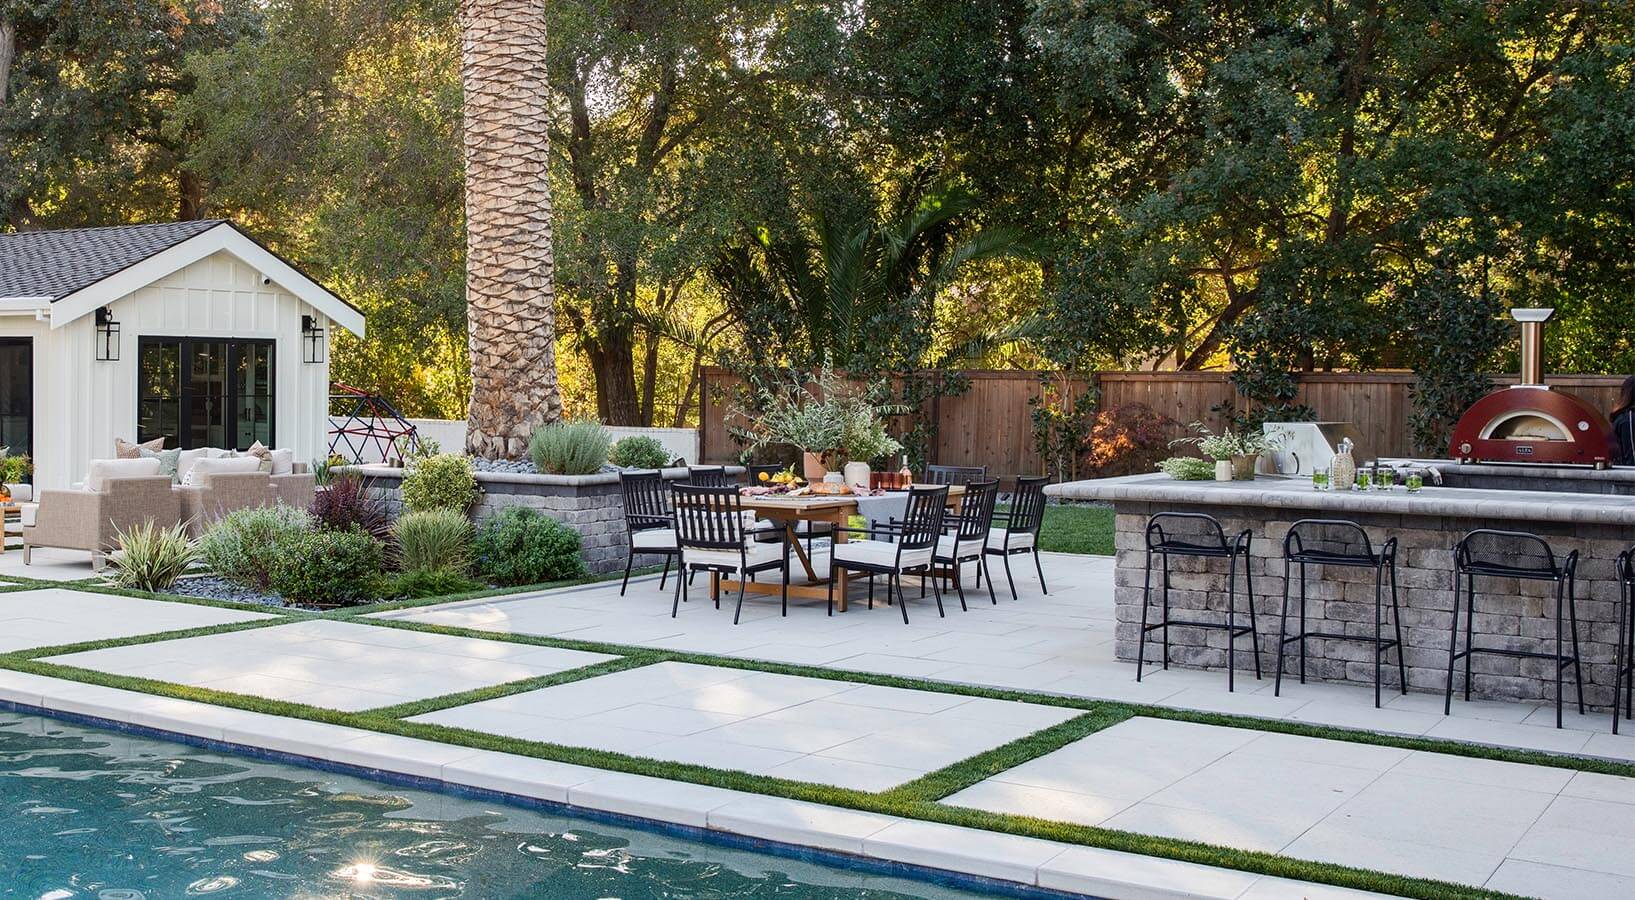 Paver patio with seating and lighting